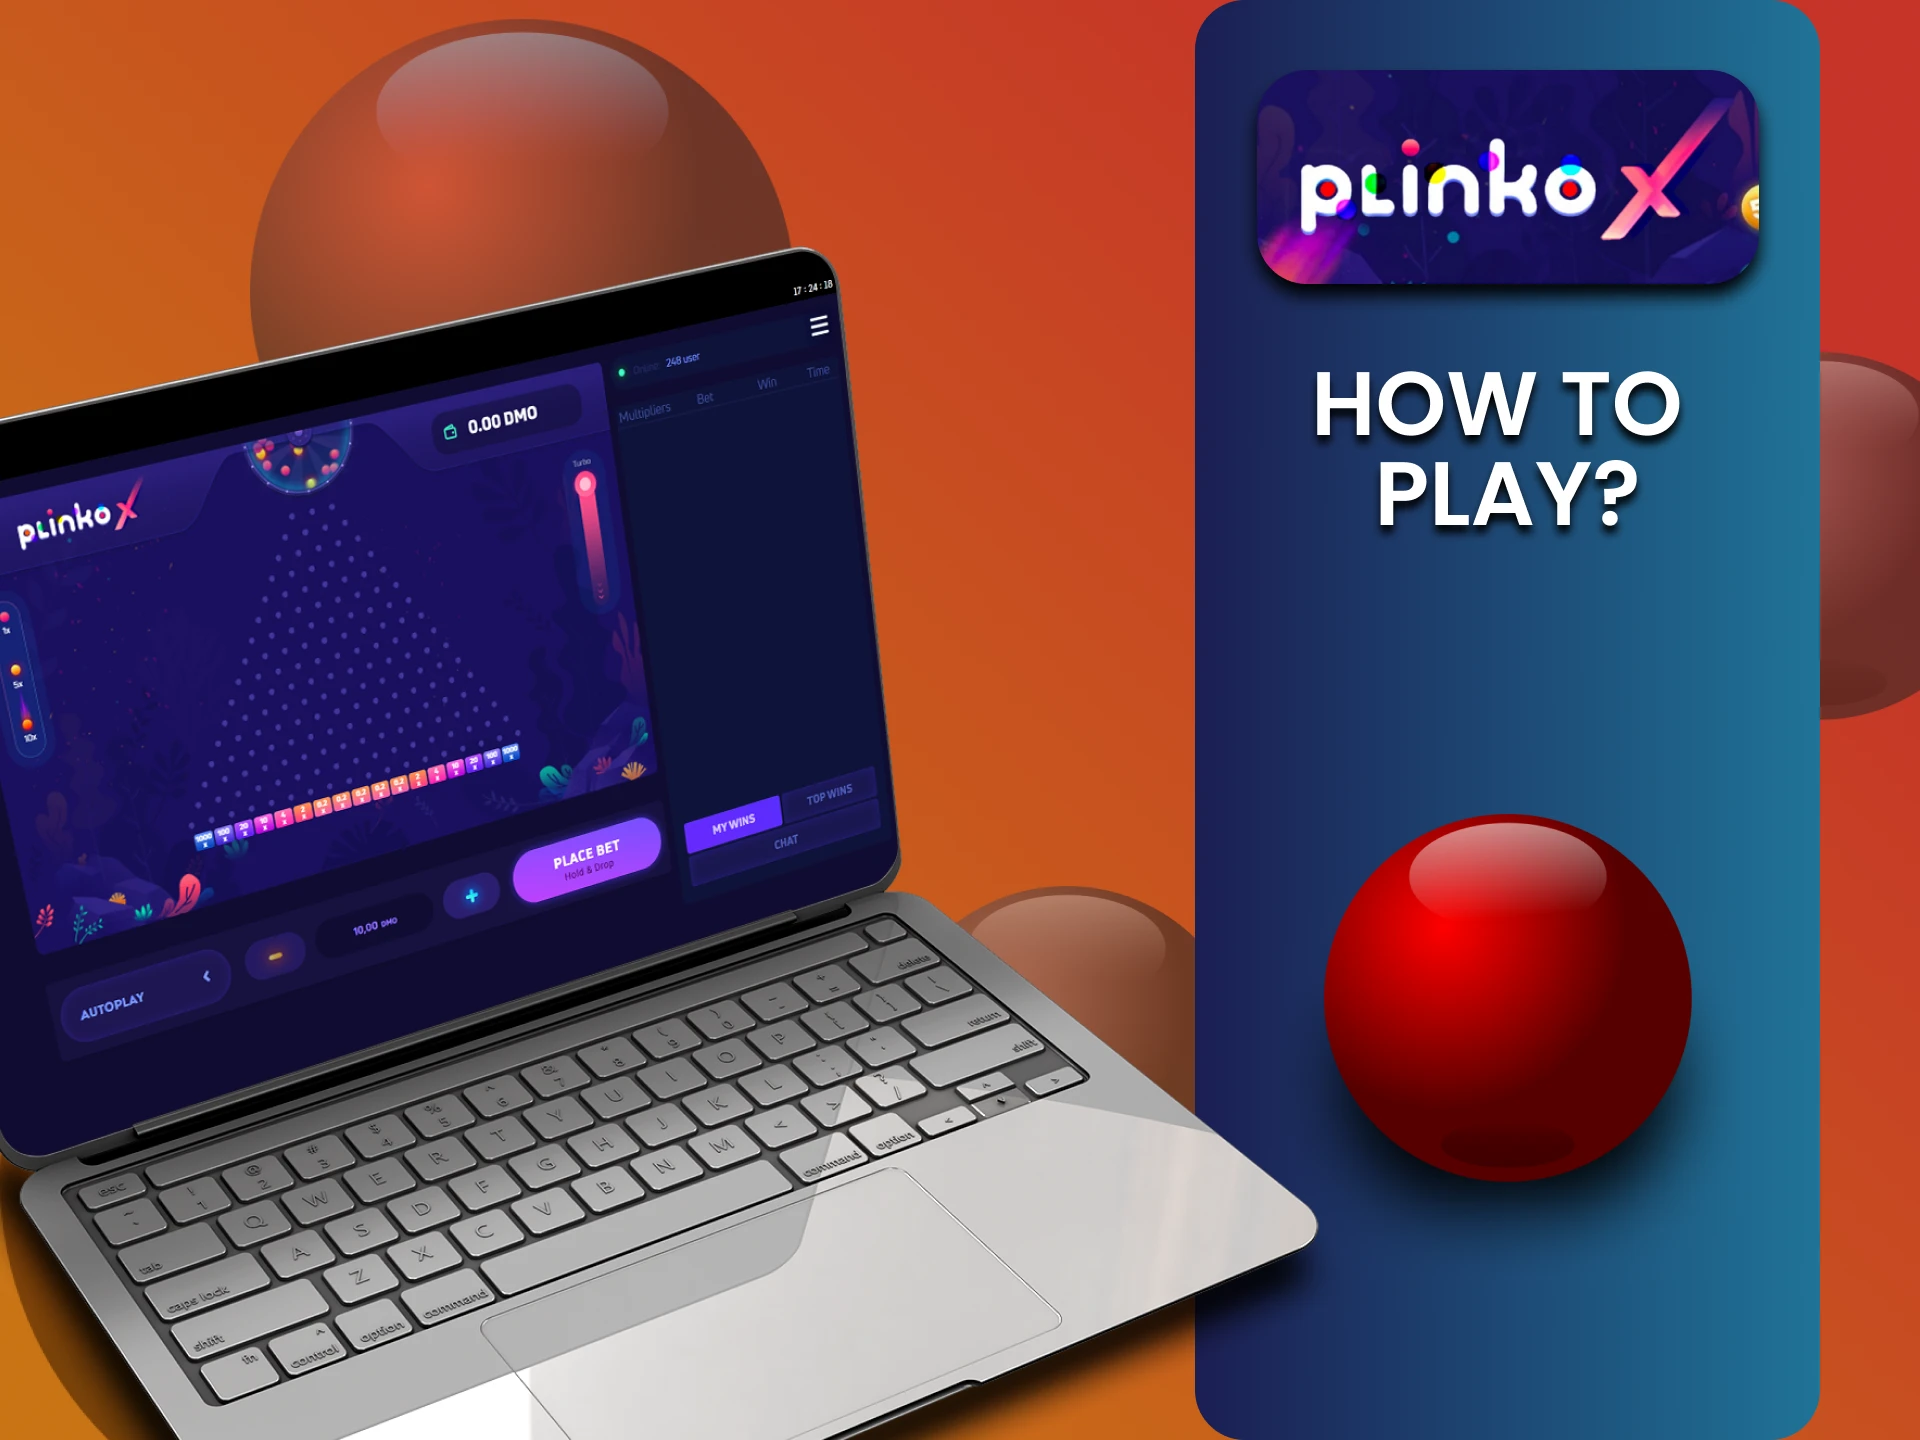 We will tell you how to start playing the game Plinko X.